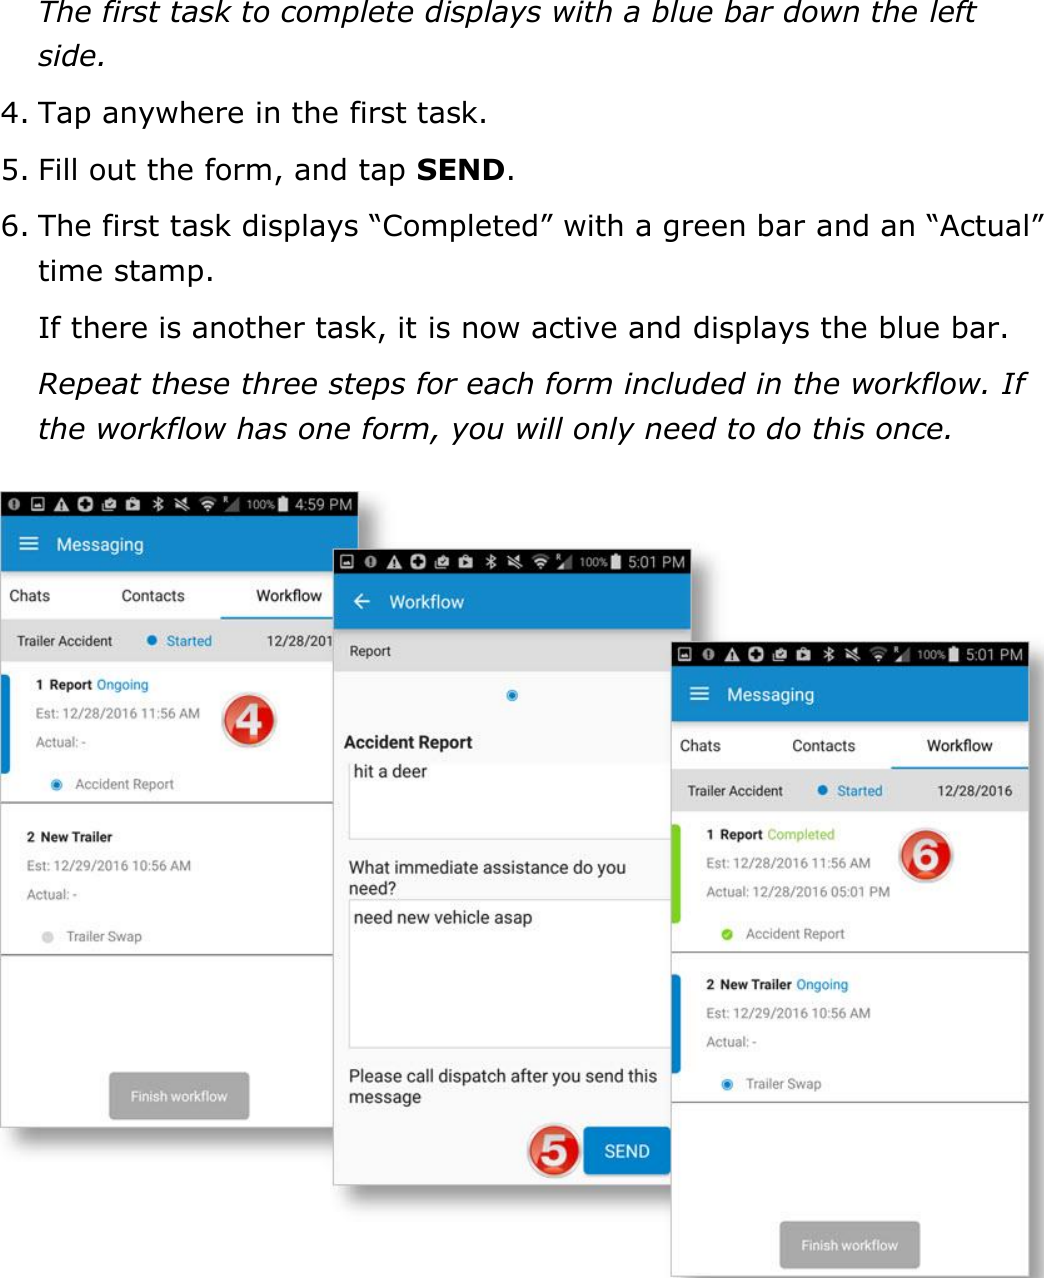 Send Messages, Forms, and Workflows DriverConnect User Guide  78 © 2016-2017, Rand McNally, Inc. The first task to complete displays with a blue bar down the left side. 4. Tap anywhere in the first task. 5. Fill out the form, and tap SEND. 6. The first task displays “Completed” with a green bar and an “Actual” time stamp. If there is another task, it is now active and displays the blue bar. Repeat these three steps for each form included in the workflow. If the workflow has one form, you will only need to do this once.    